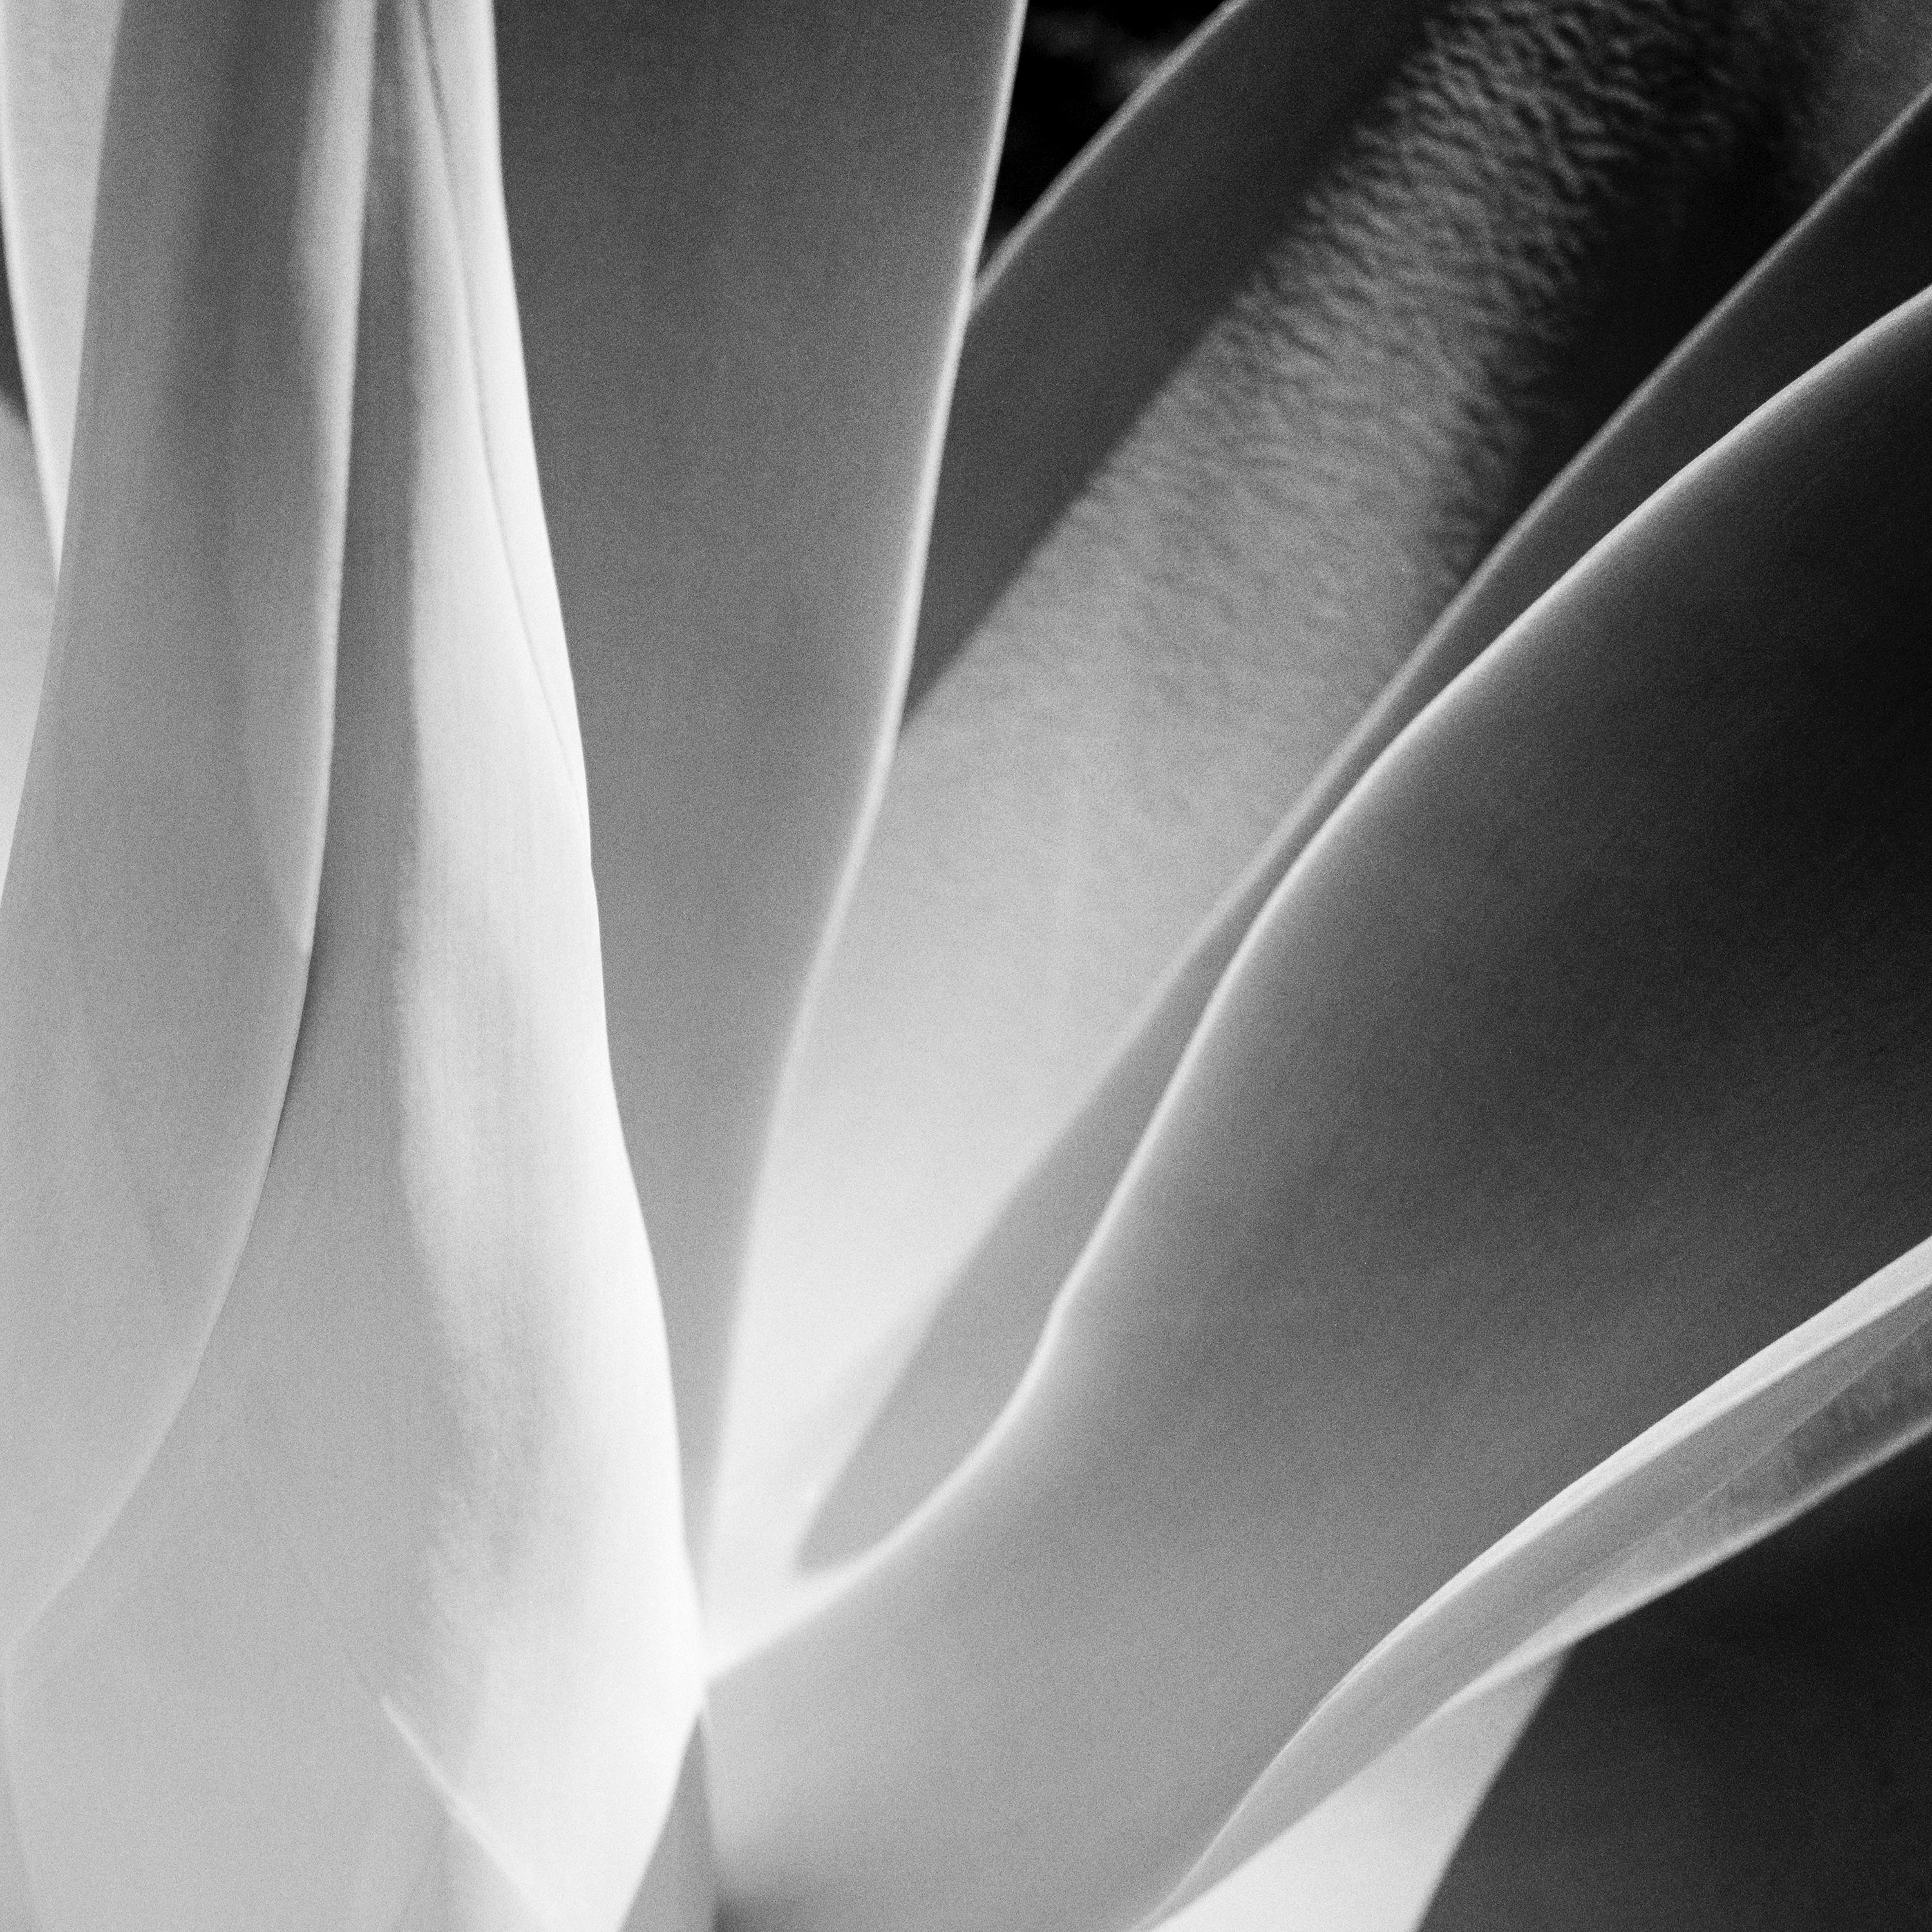 Blue Agave, Arizona, USA, abstract black and white art photography, landscape For Sale 5